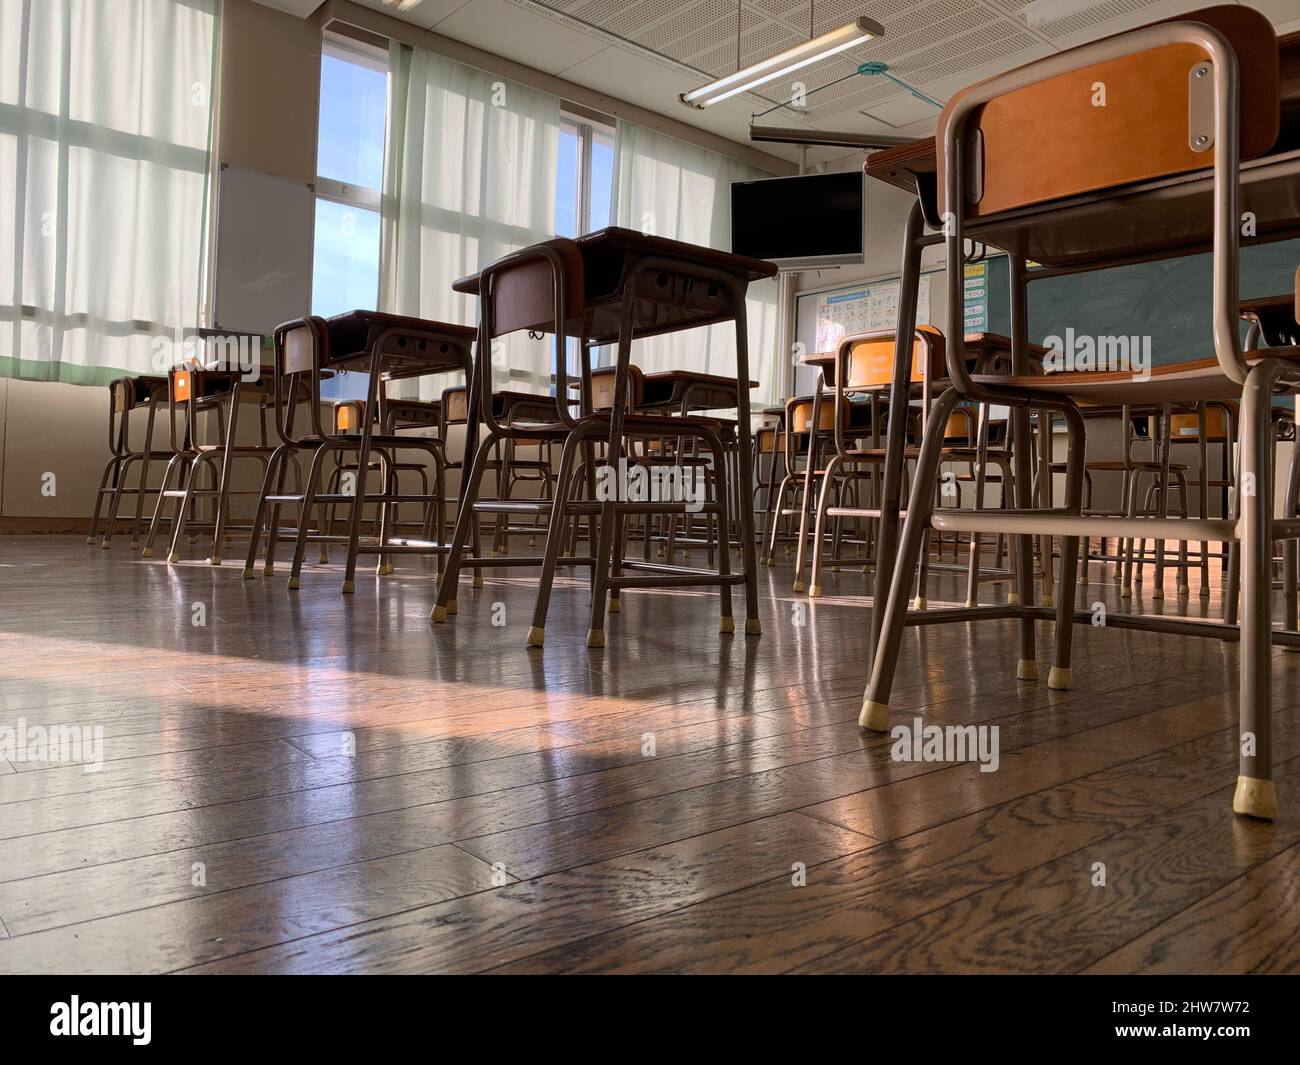 Japanese public school classroom with wooden chairs and desks. Stock Photo